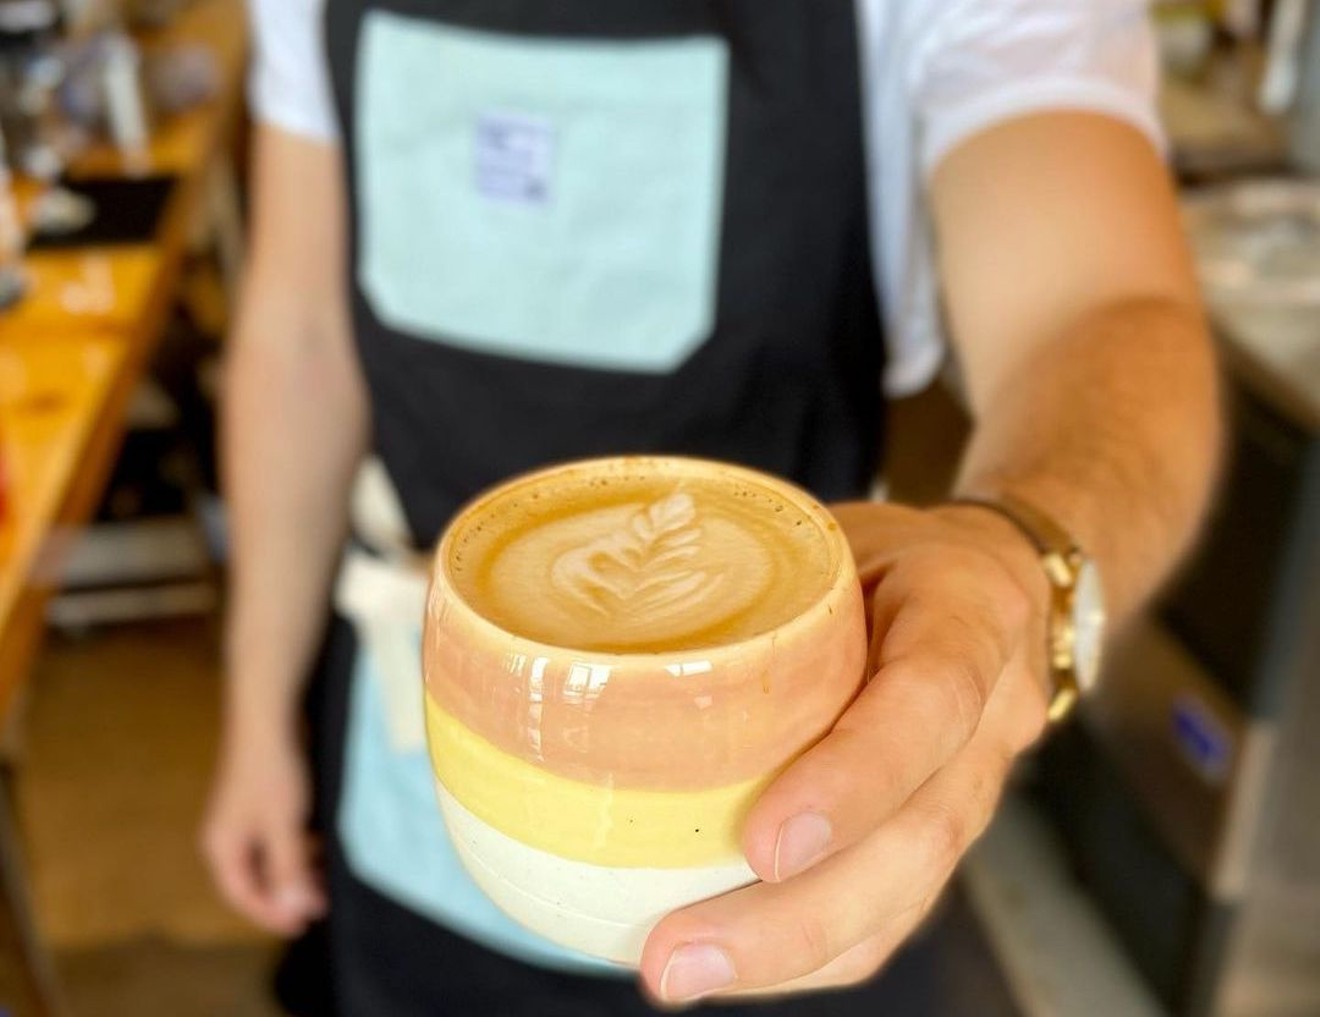 Sip a lovely latte in a handmade ceramic cup at PIP.